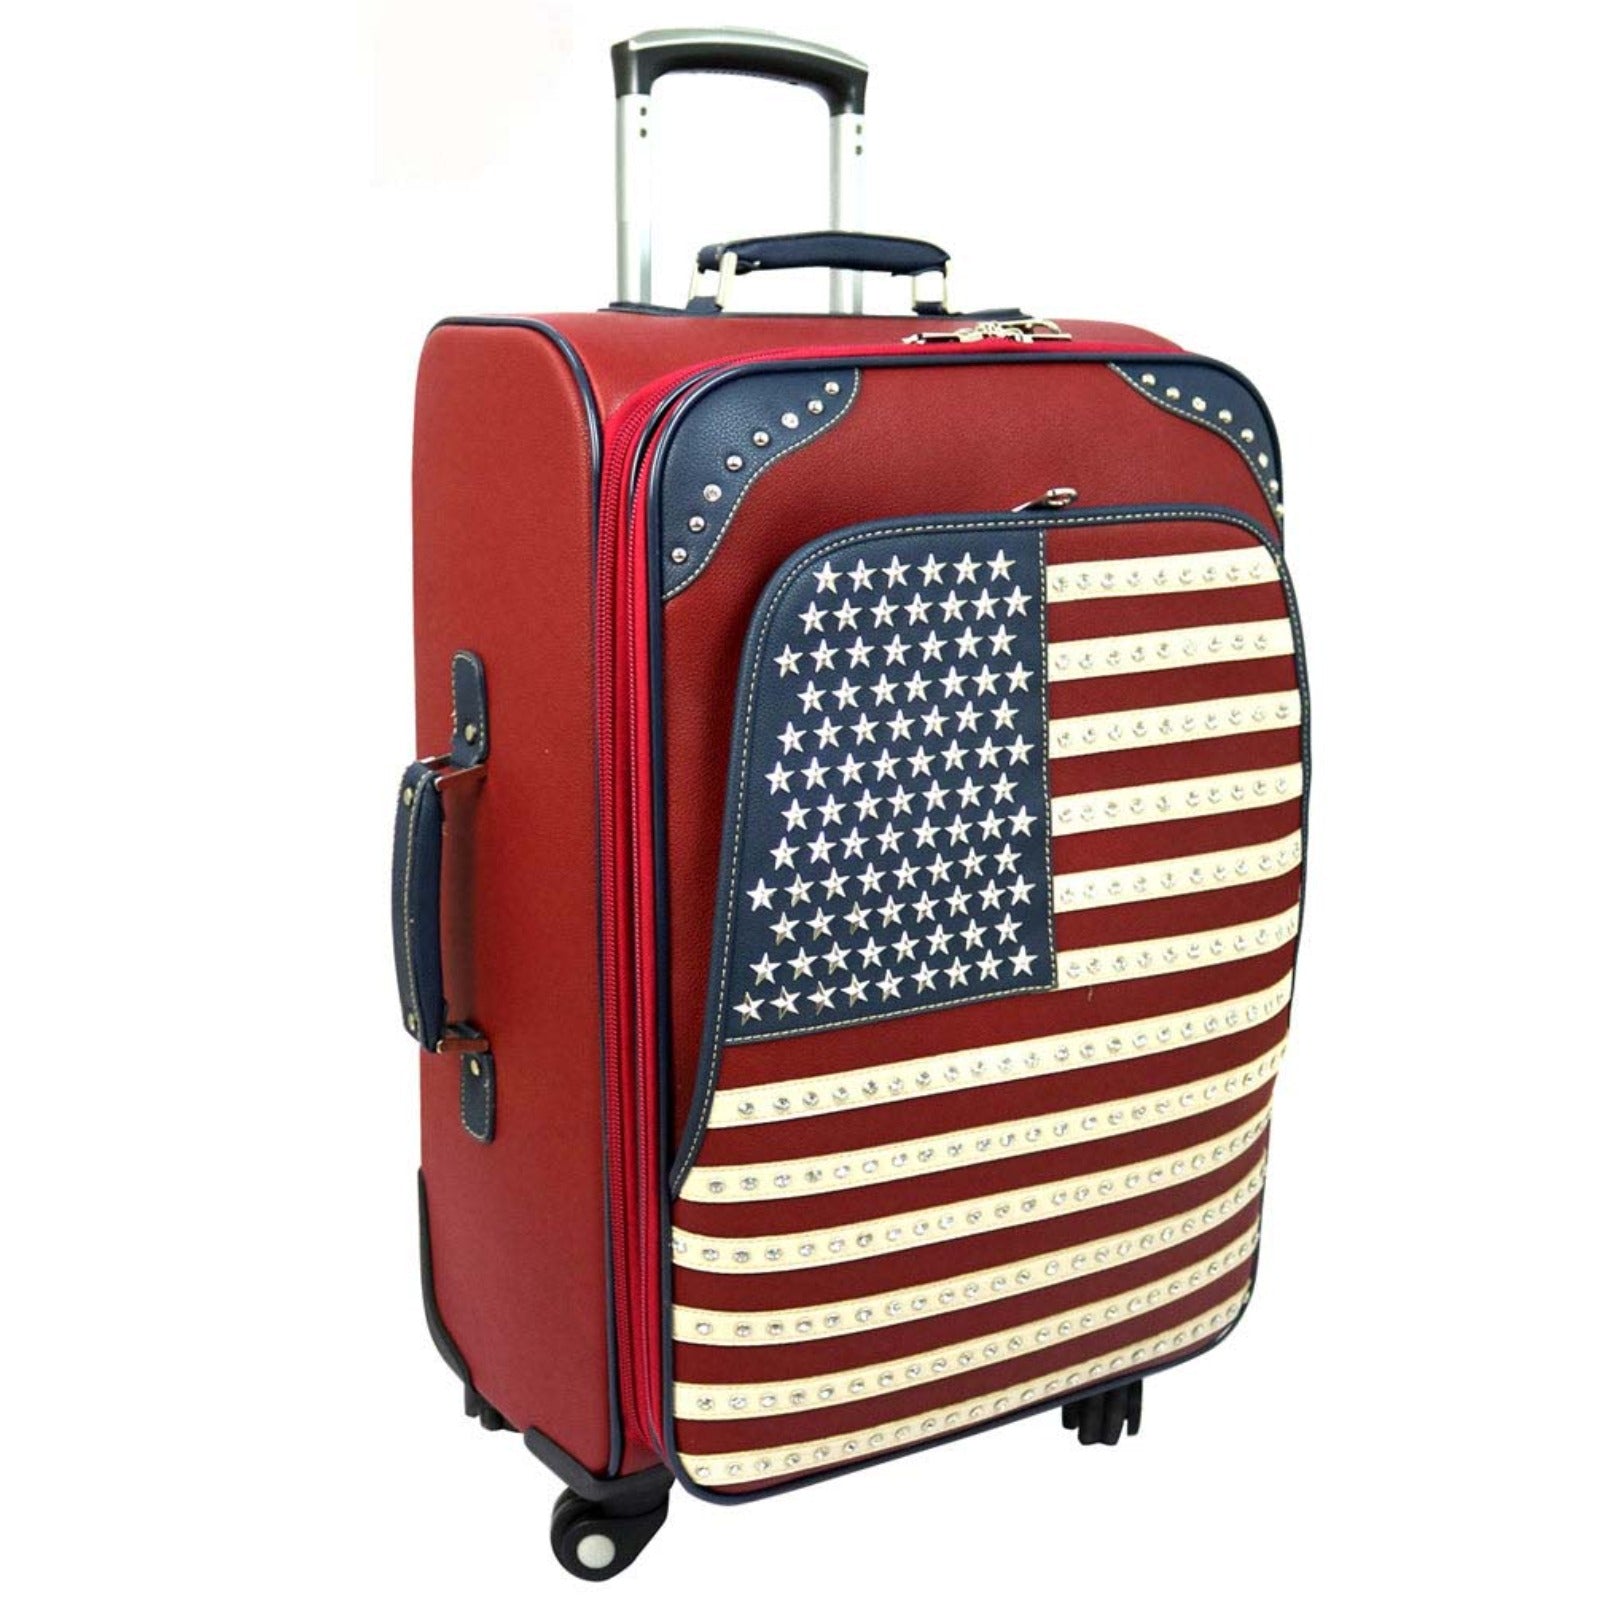 Montana West American Pride Collection 3 PC Luggage Set -Red - Cowgirl Wear